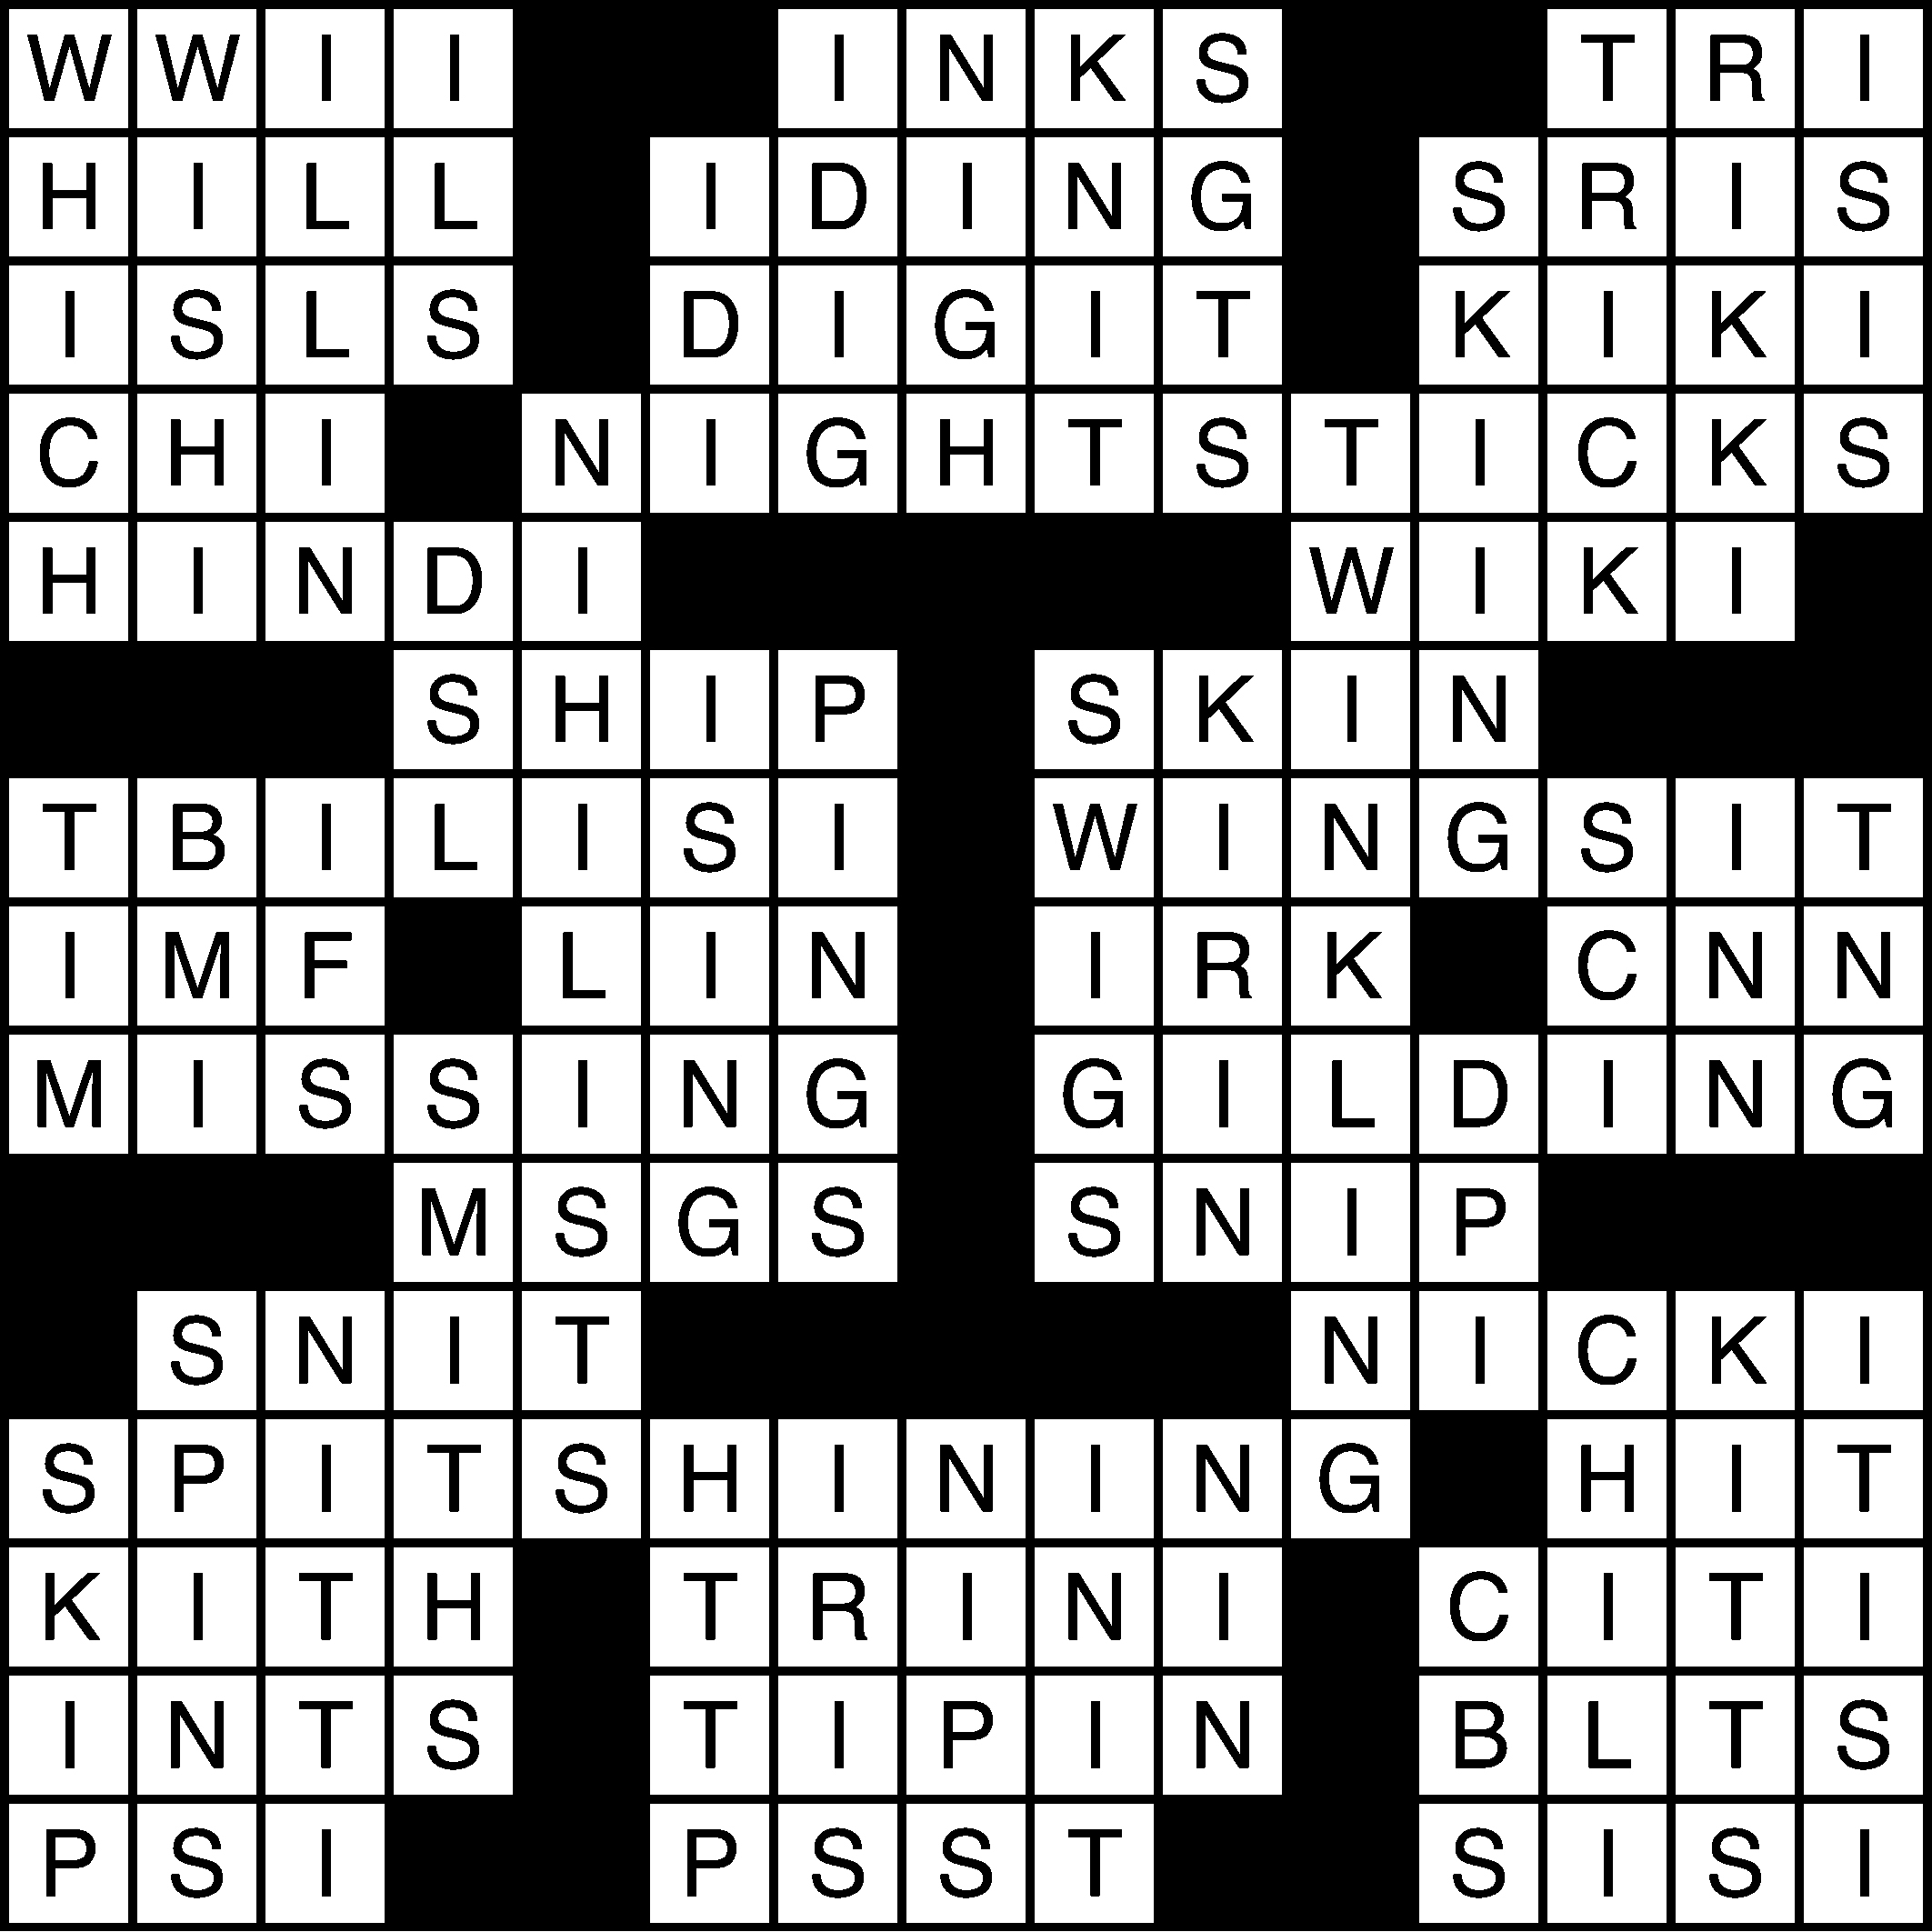 03/19/2014 Crossword: Answers The Baylor Lariat